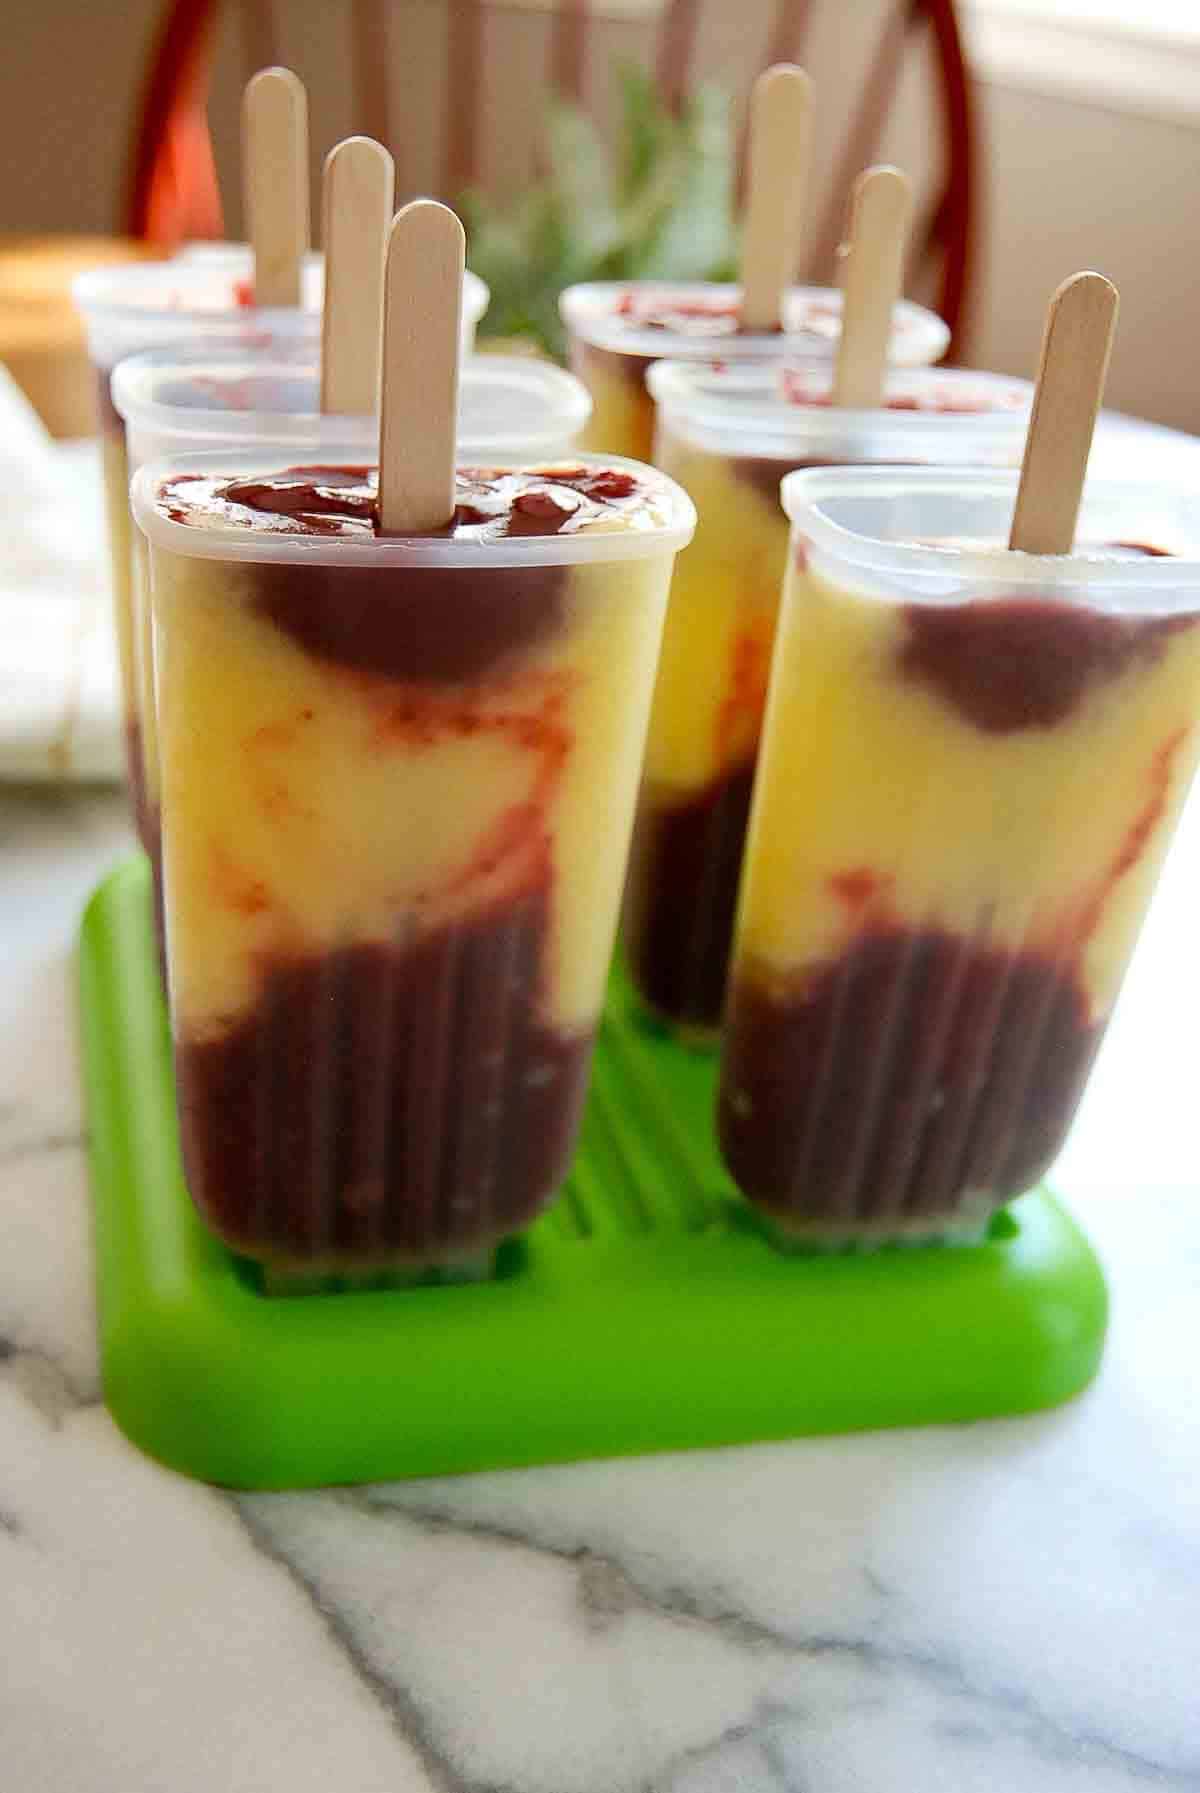 fruit popsicles in popsicle mold with sticks.